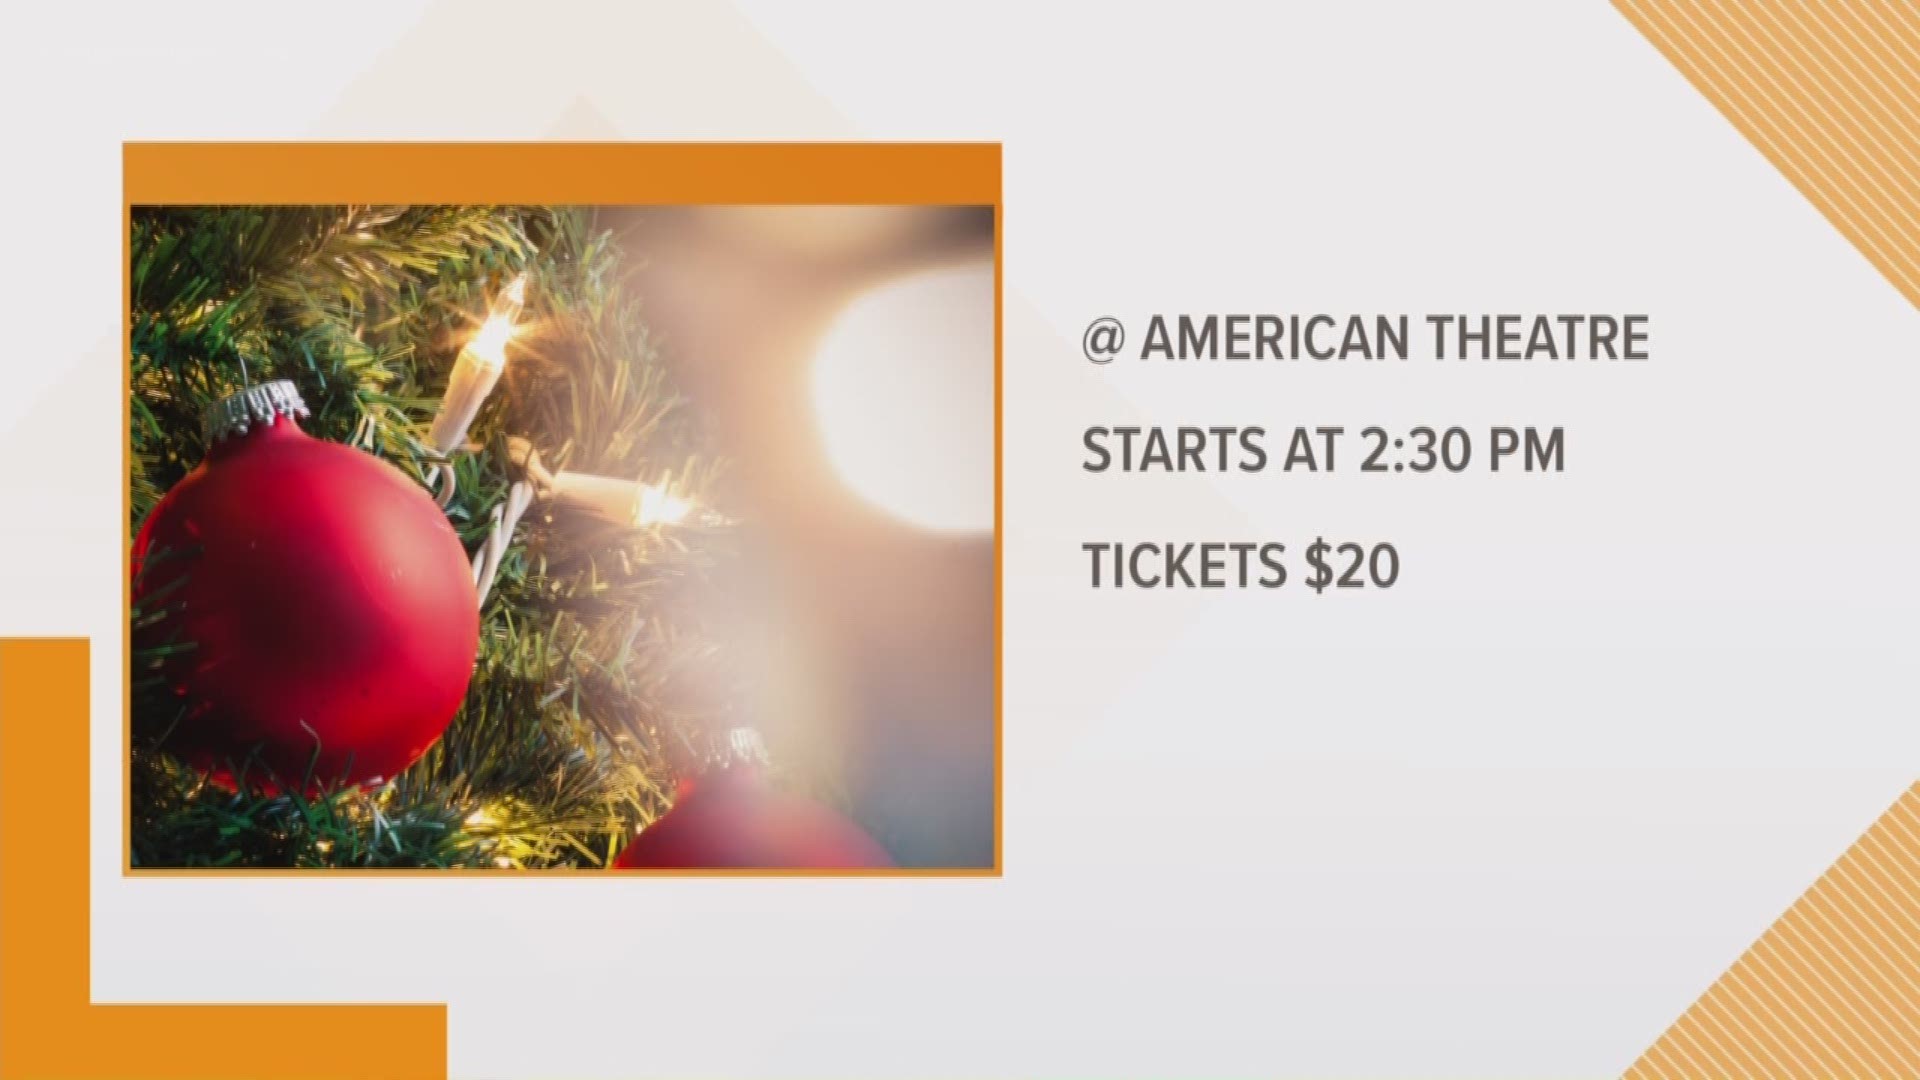 The Hampton Roads Philharmonic Winter Classic is coming back to the American Theatre in Phoebus. The concert will highlight holiday favorites.